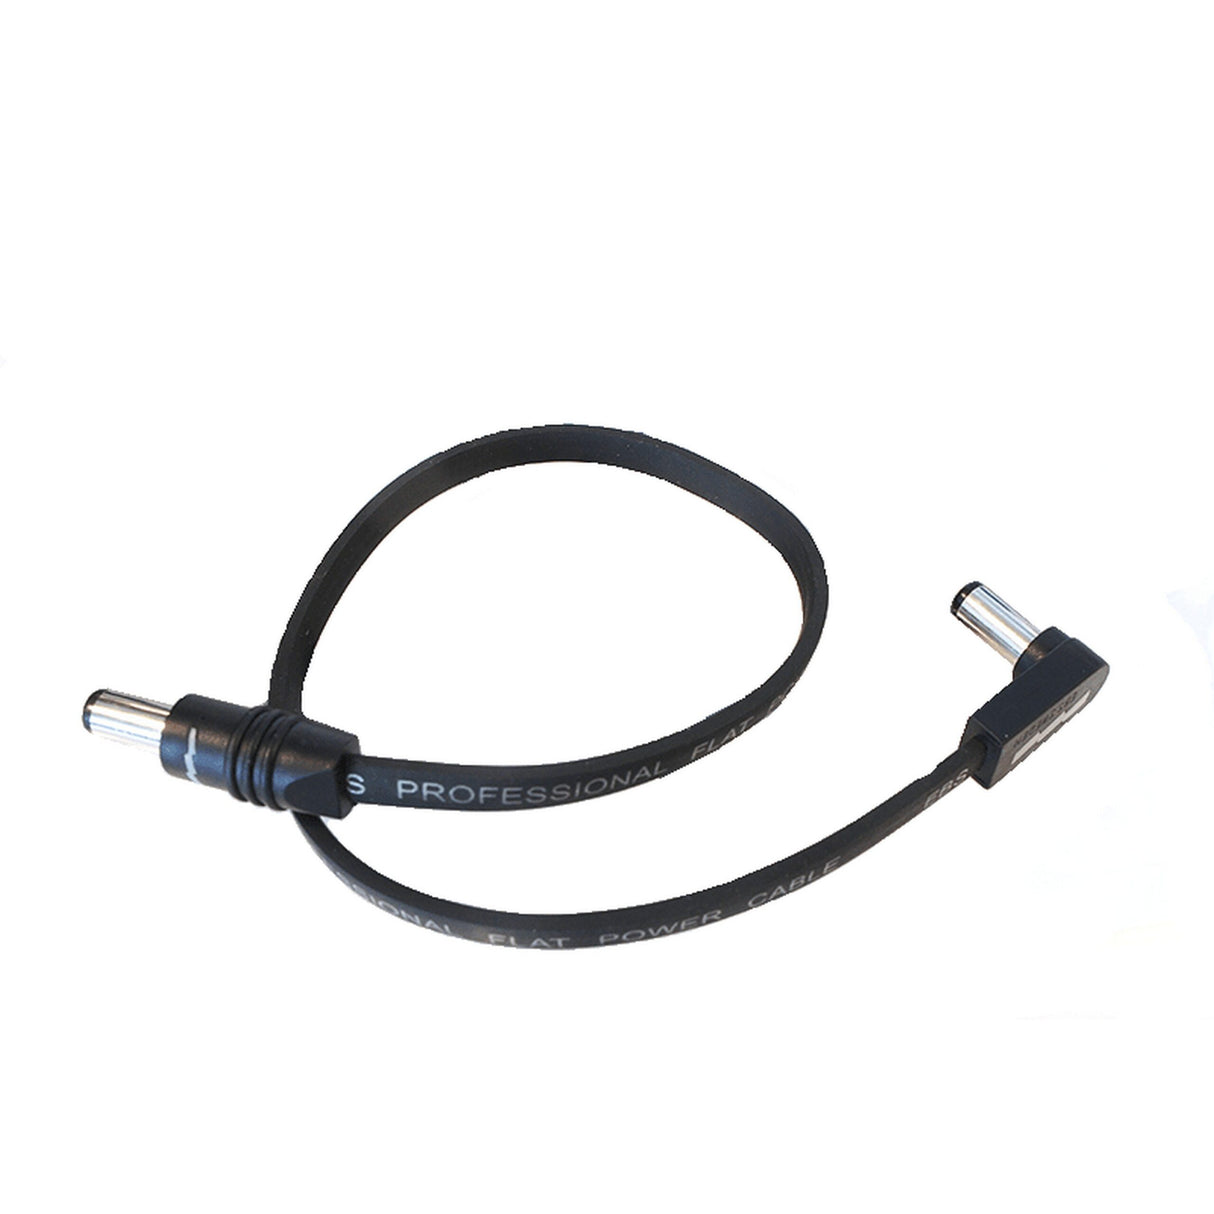 EBS DC1-48 90/0 Flat Power Cable, 48 Centimeters